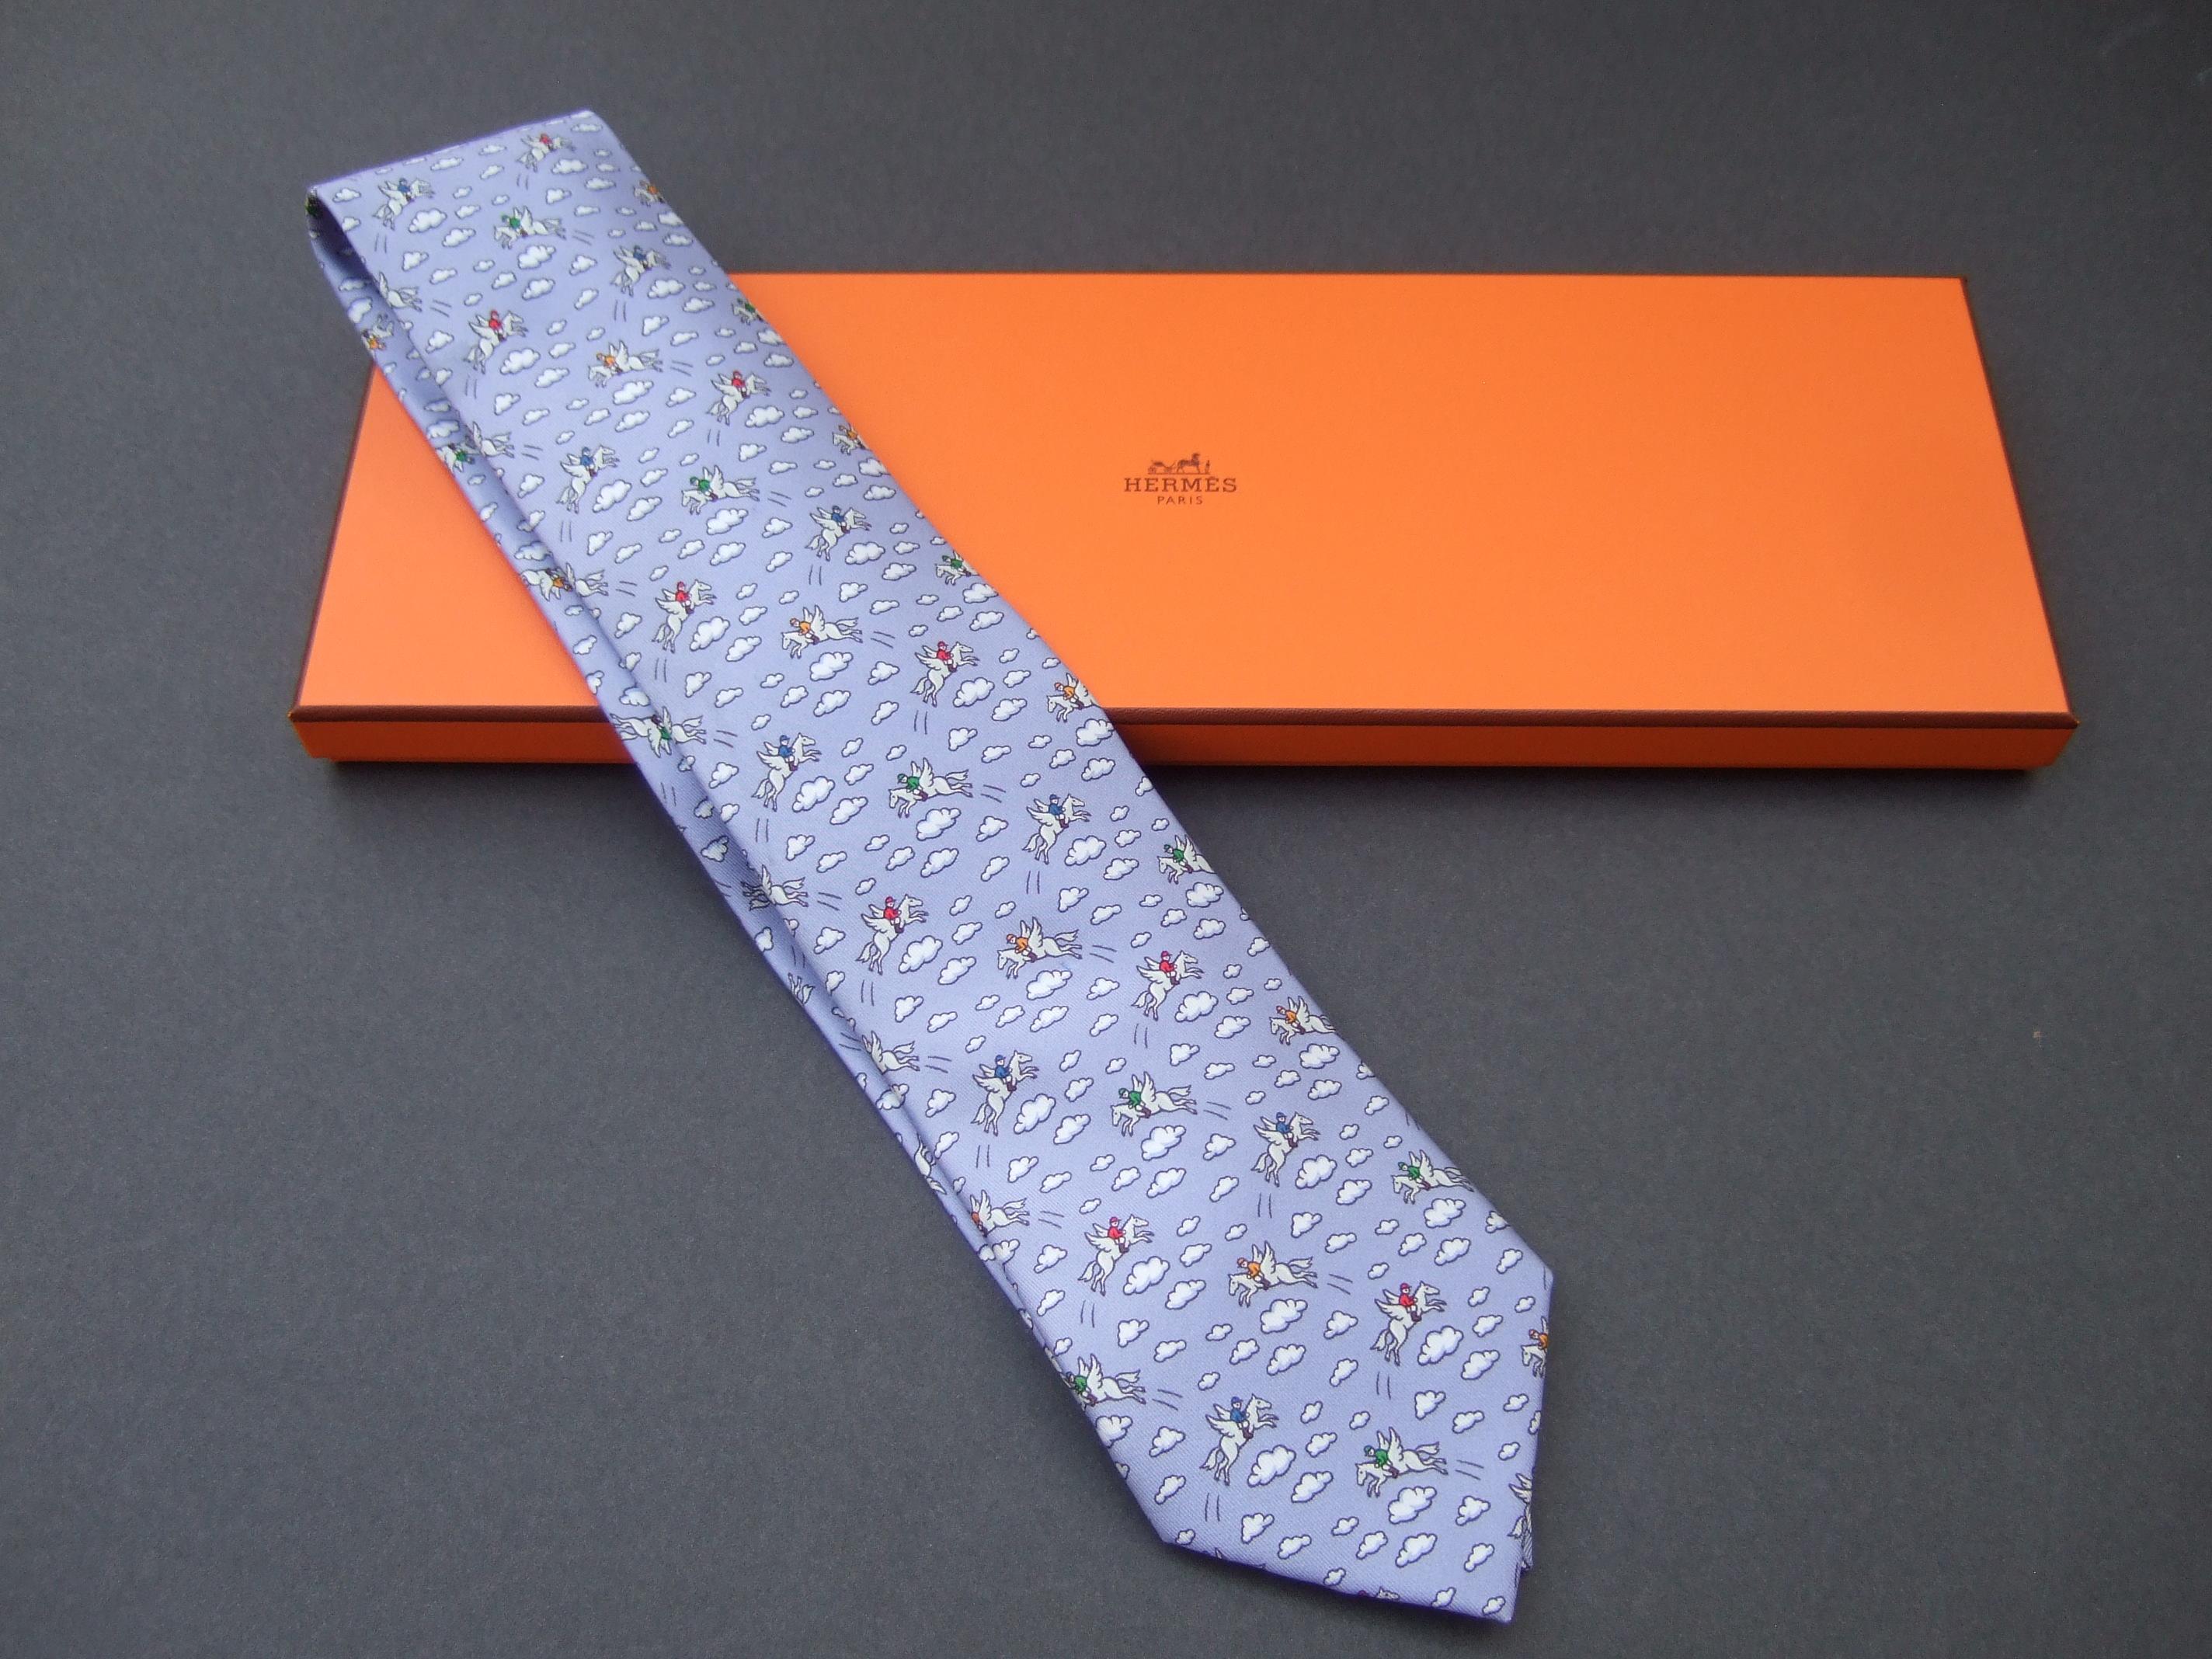 Hermes Paris whimsical silk flying pegasus rider necktie in Hermes box c 1990s 
The charming necktie is illuminated with a sky blue background 
with a series of billowy clouds 

Makes a stylish fun accessory

The widest section of the necktie